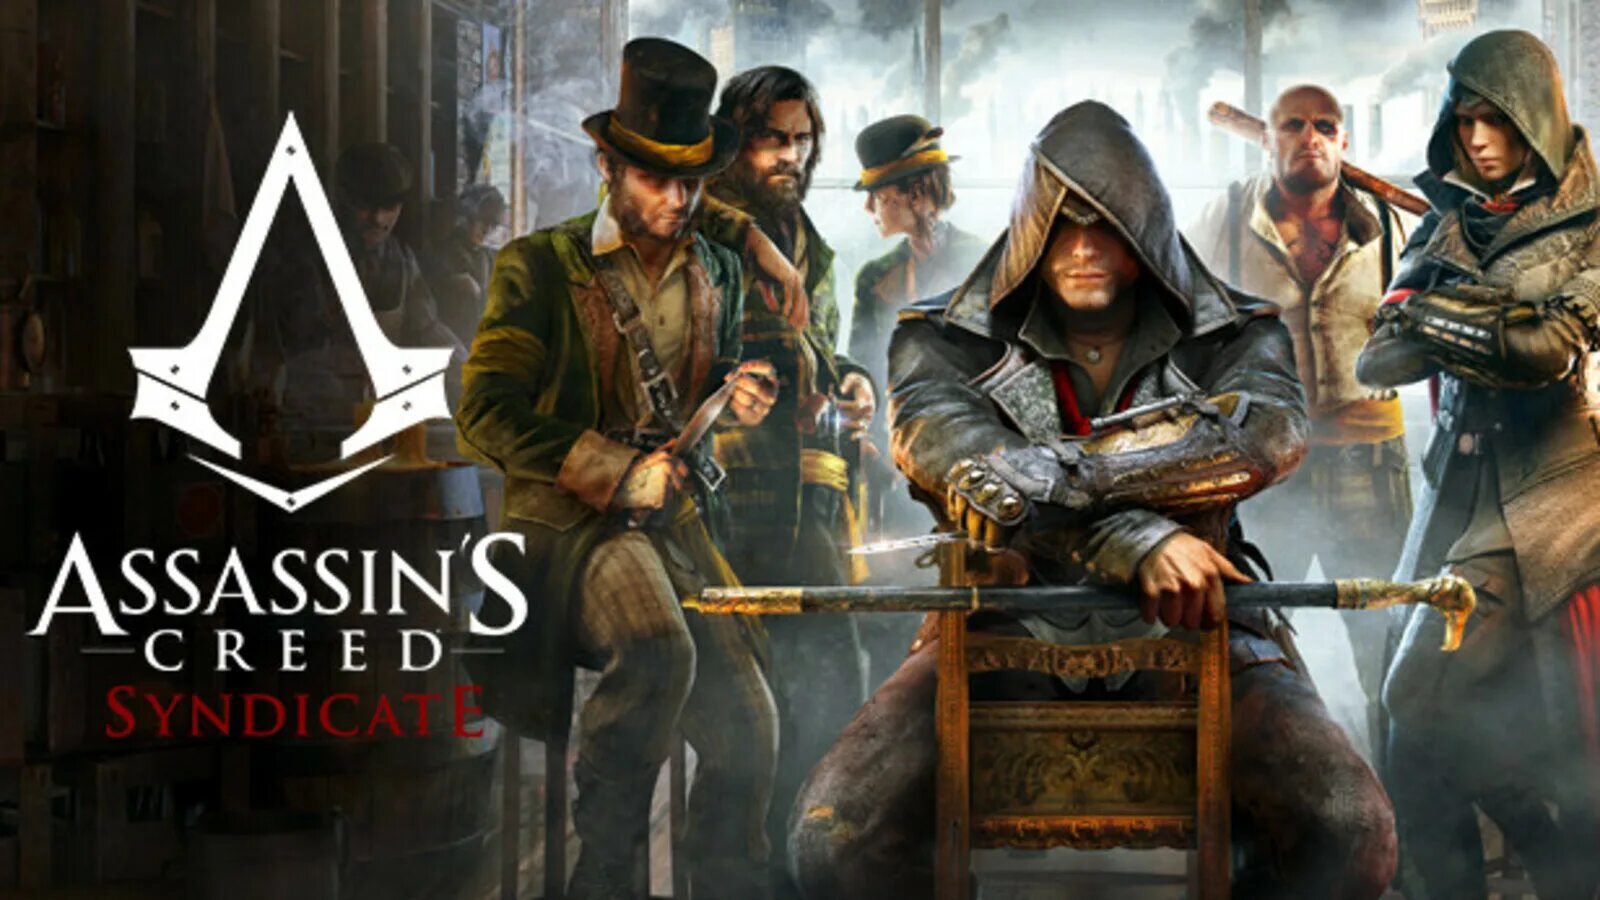 Assassins Creed Syndicate для Xbox. Assassin's Creed Syndicate мир. Ассасин Крид Синдикат арт ранние. Assassins Creed Синдикат оружие. Assassin s nintendo